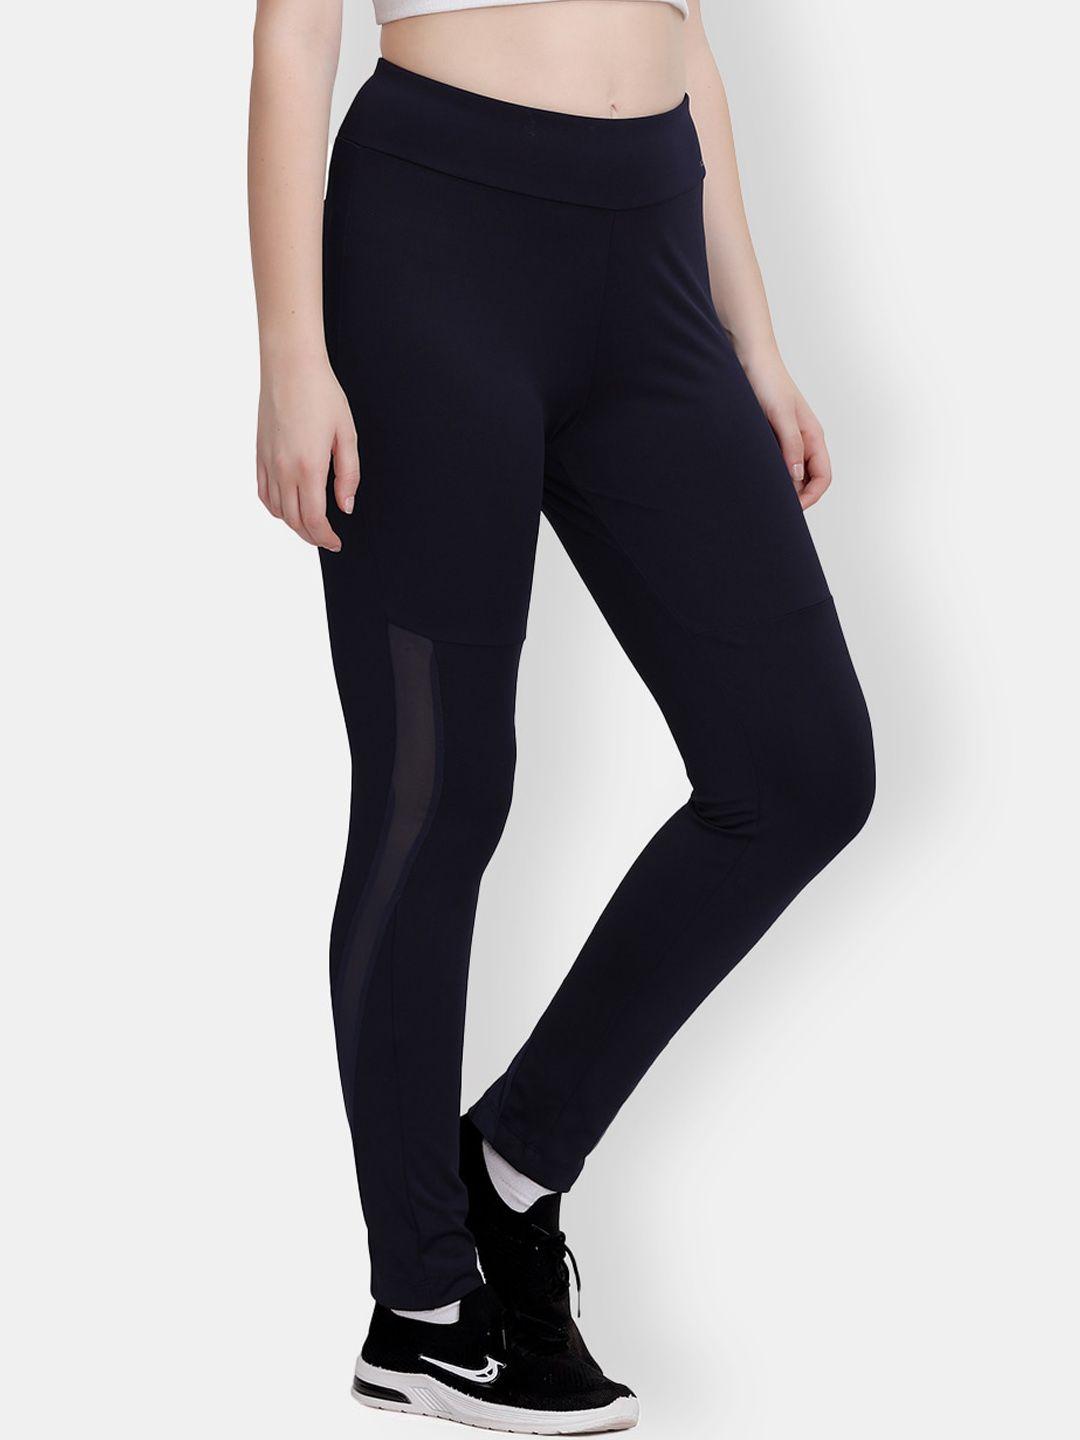 maysixty ankle length tights